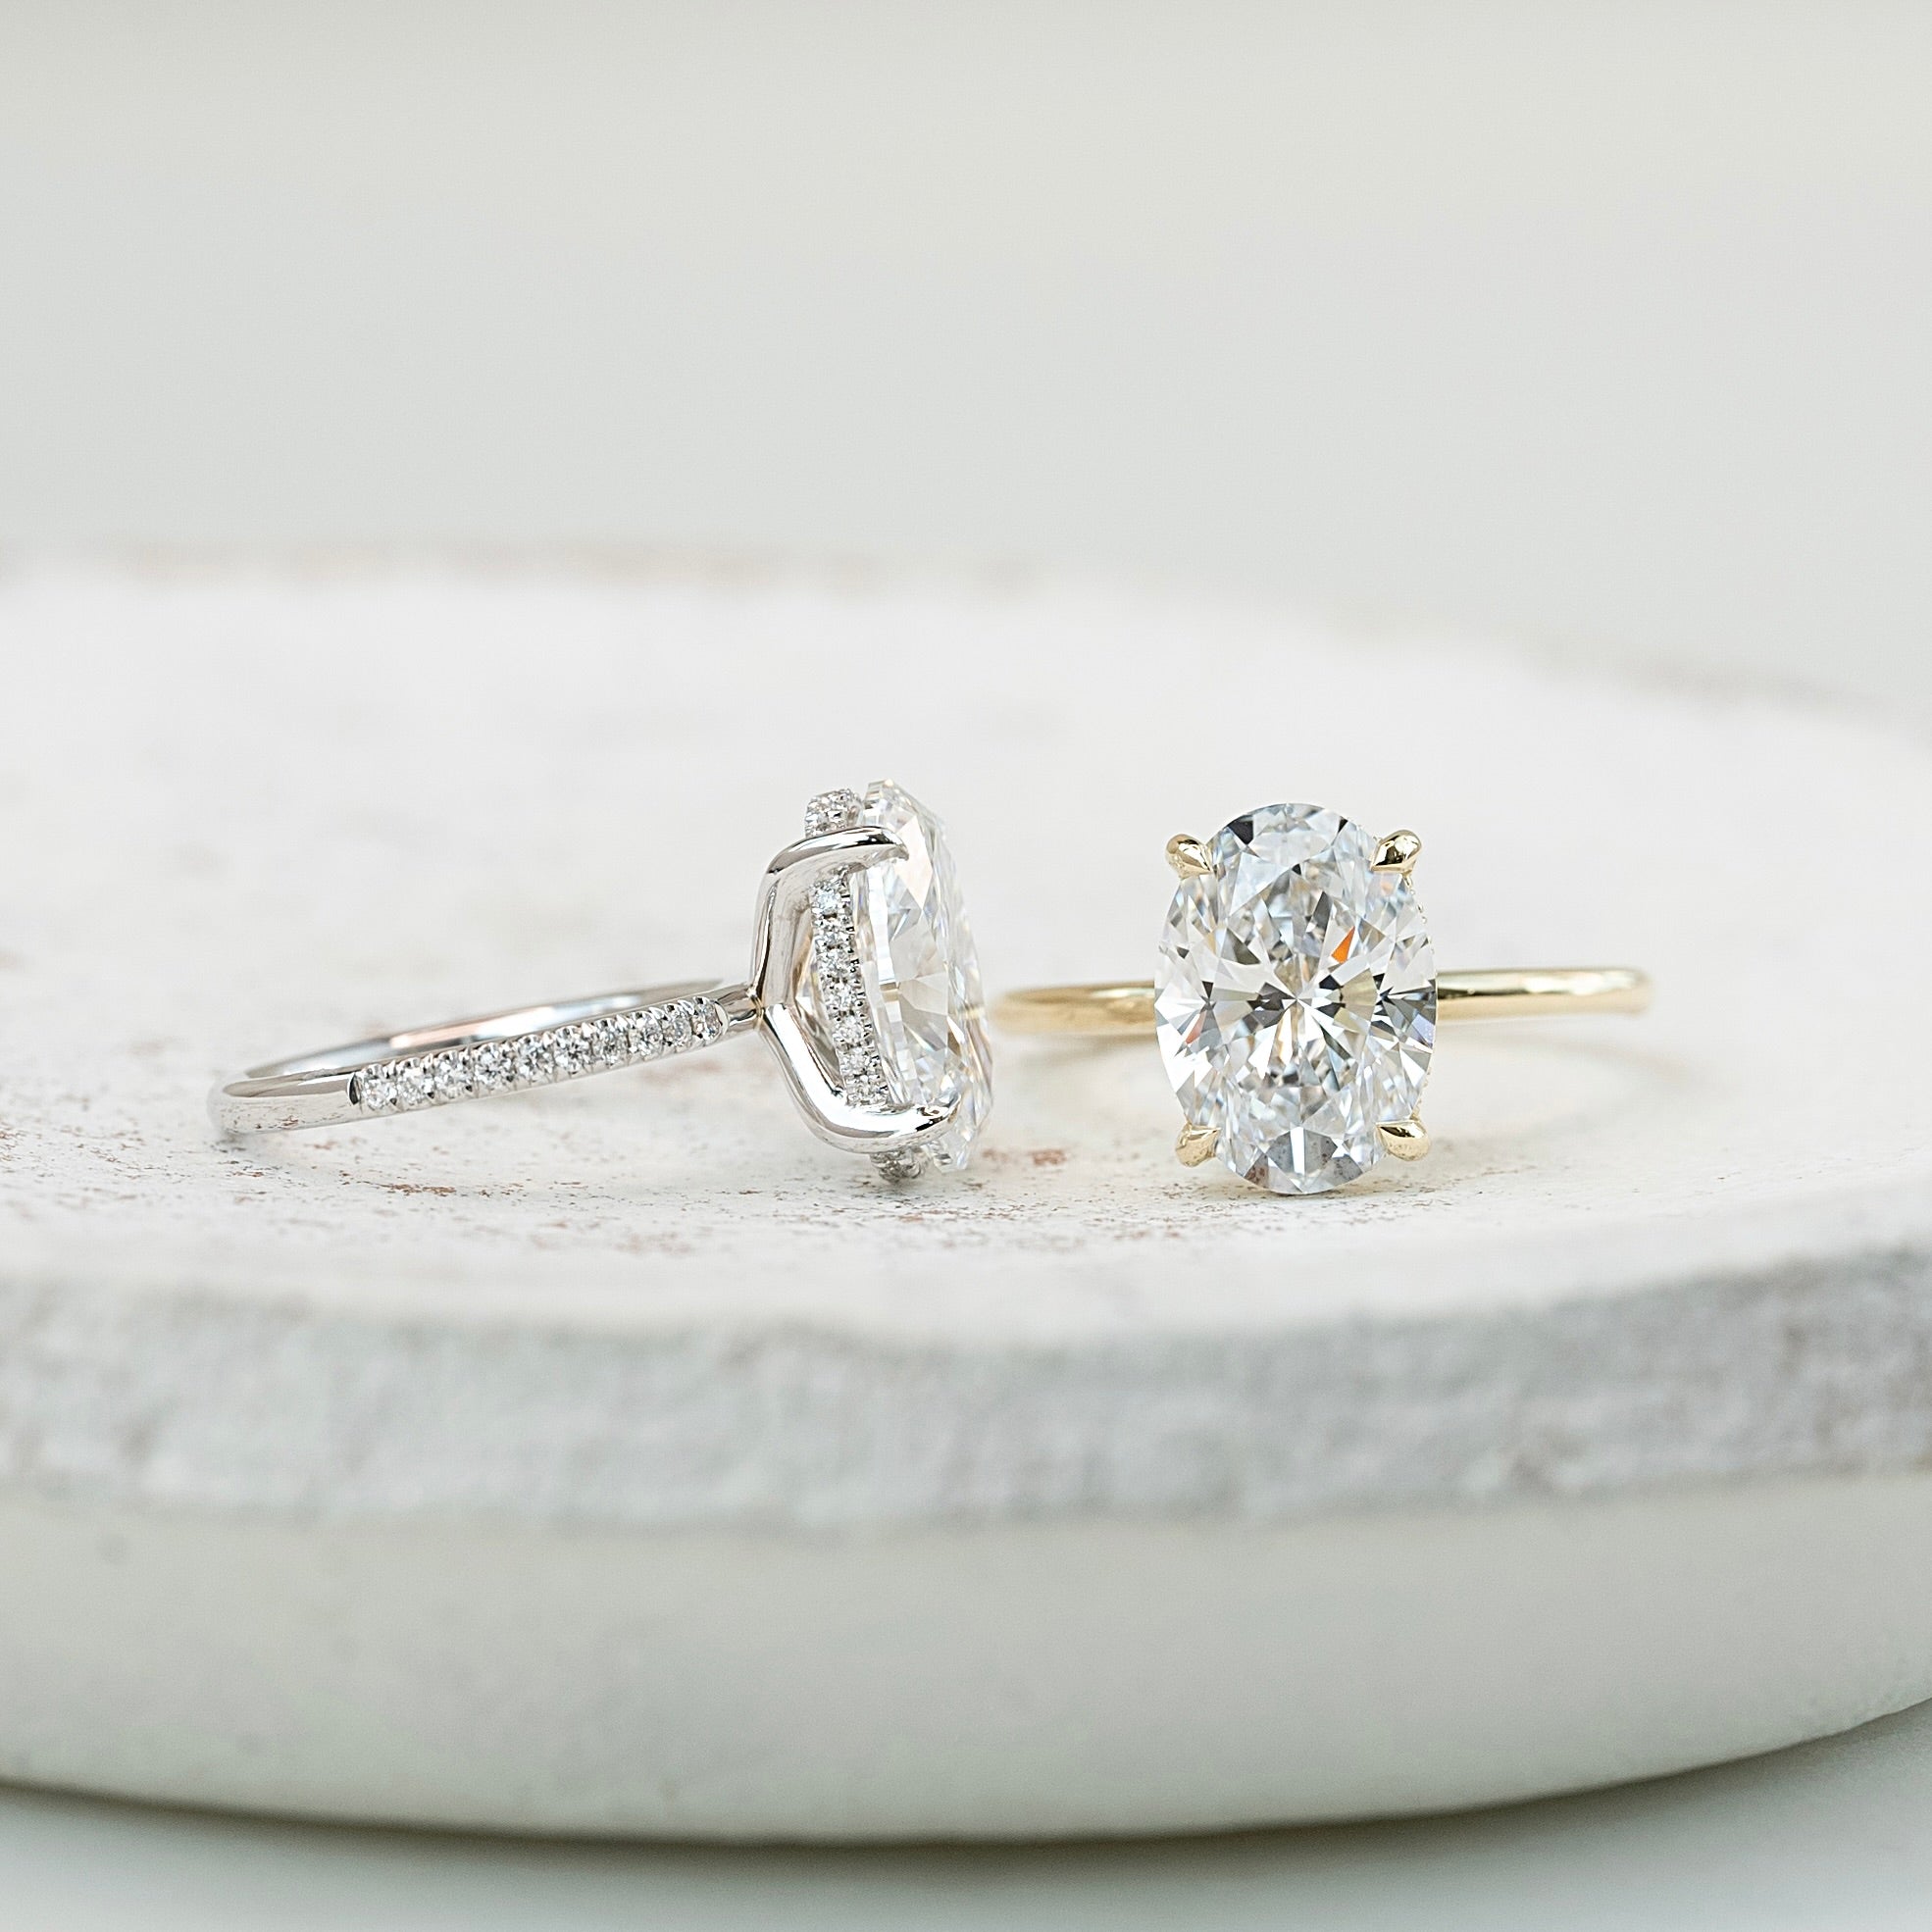 Engagement Rings for Quiet Luxury: A Trendsetter's Guide